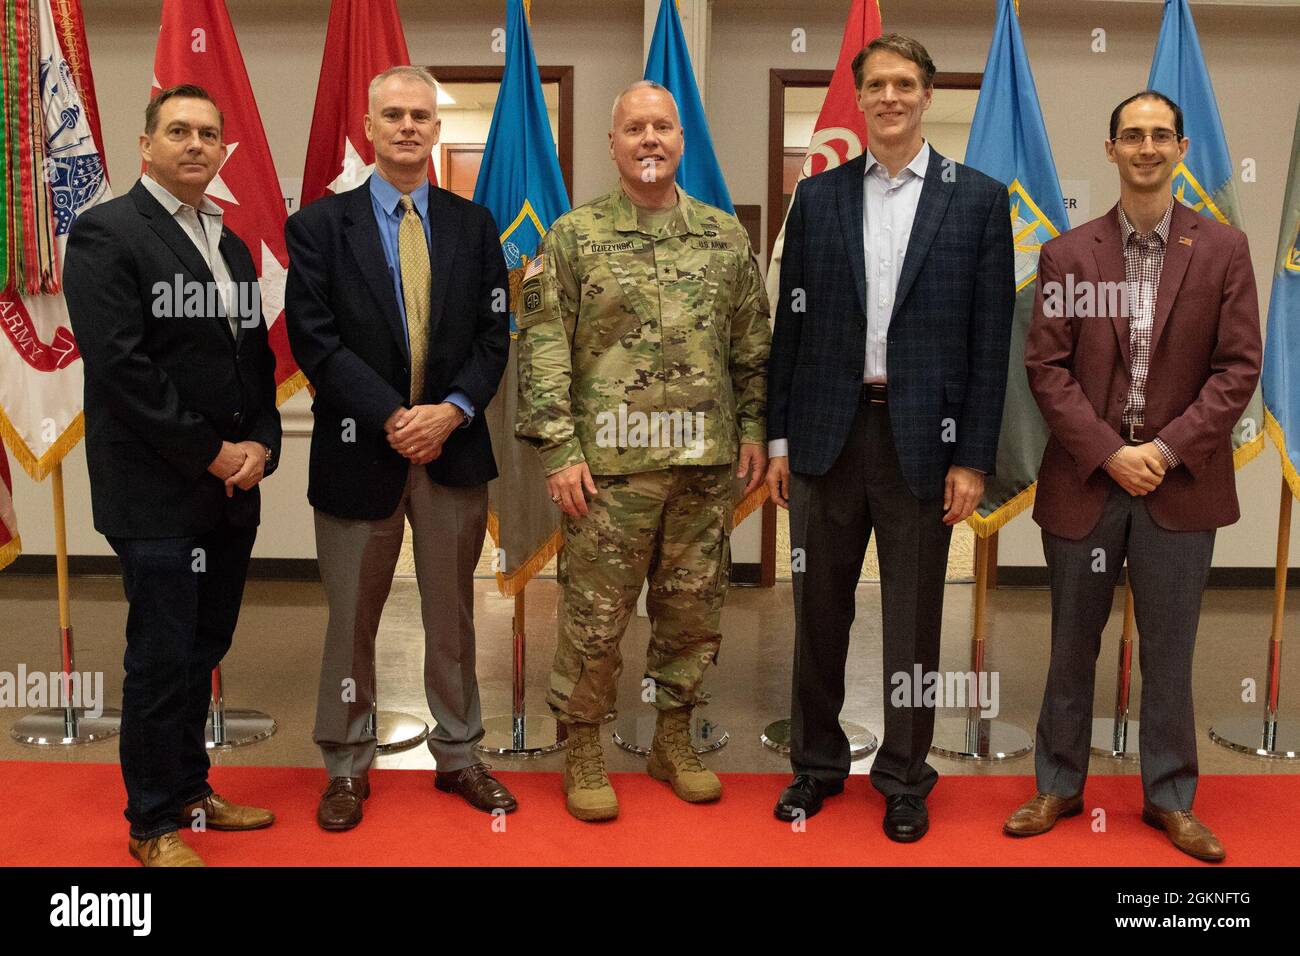 Military Intelligence Readiness Command (MIRC) Commanding General Brig. Gen. Joseph Dziezynski poses with fellow colleagues from his civilian occupation with Northrop Grumman after the MIRC assumption of command ceremony, Fort Belvoir, Virginia, June 5, 2021. Stock Photo